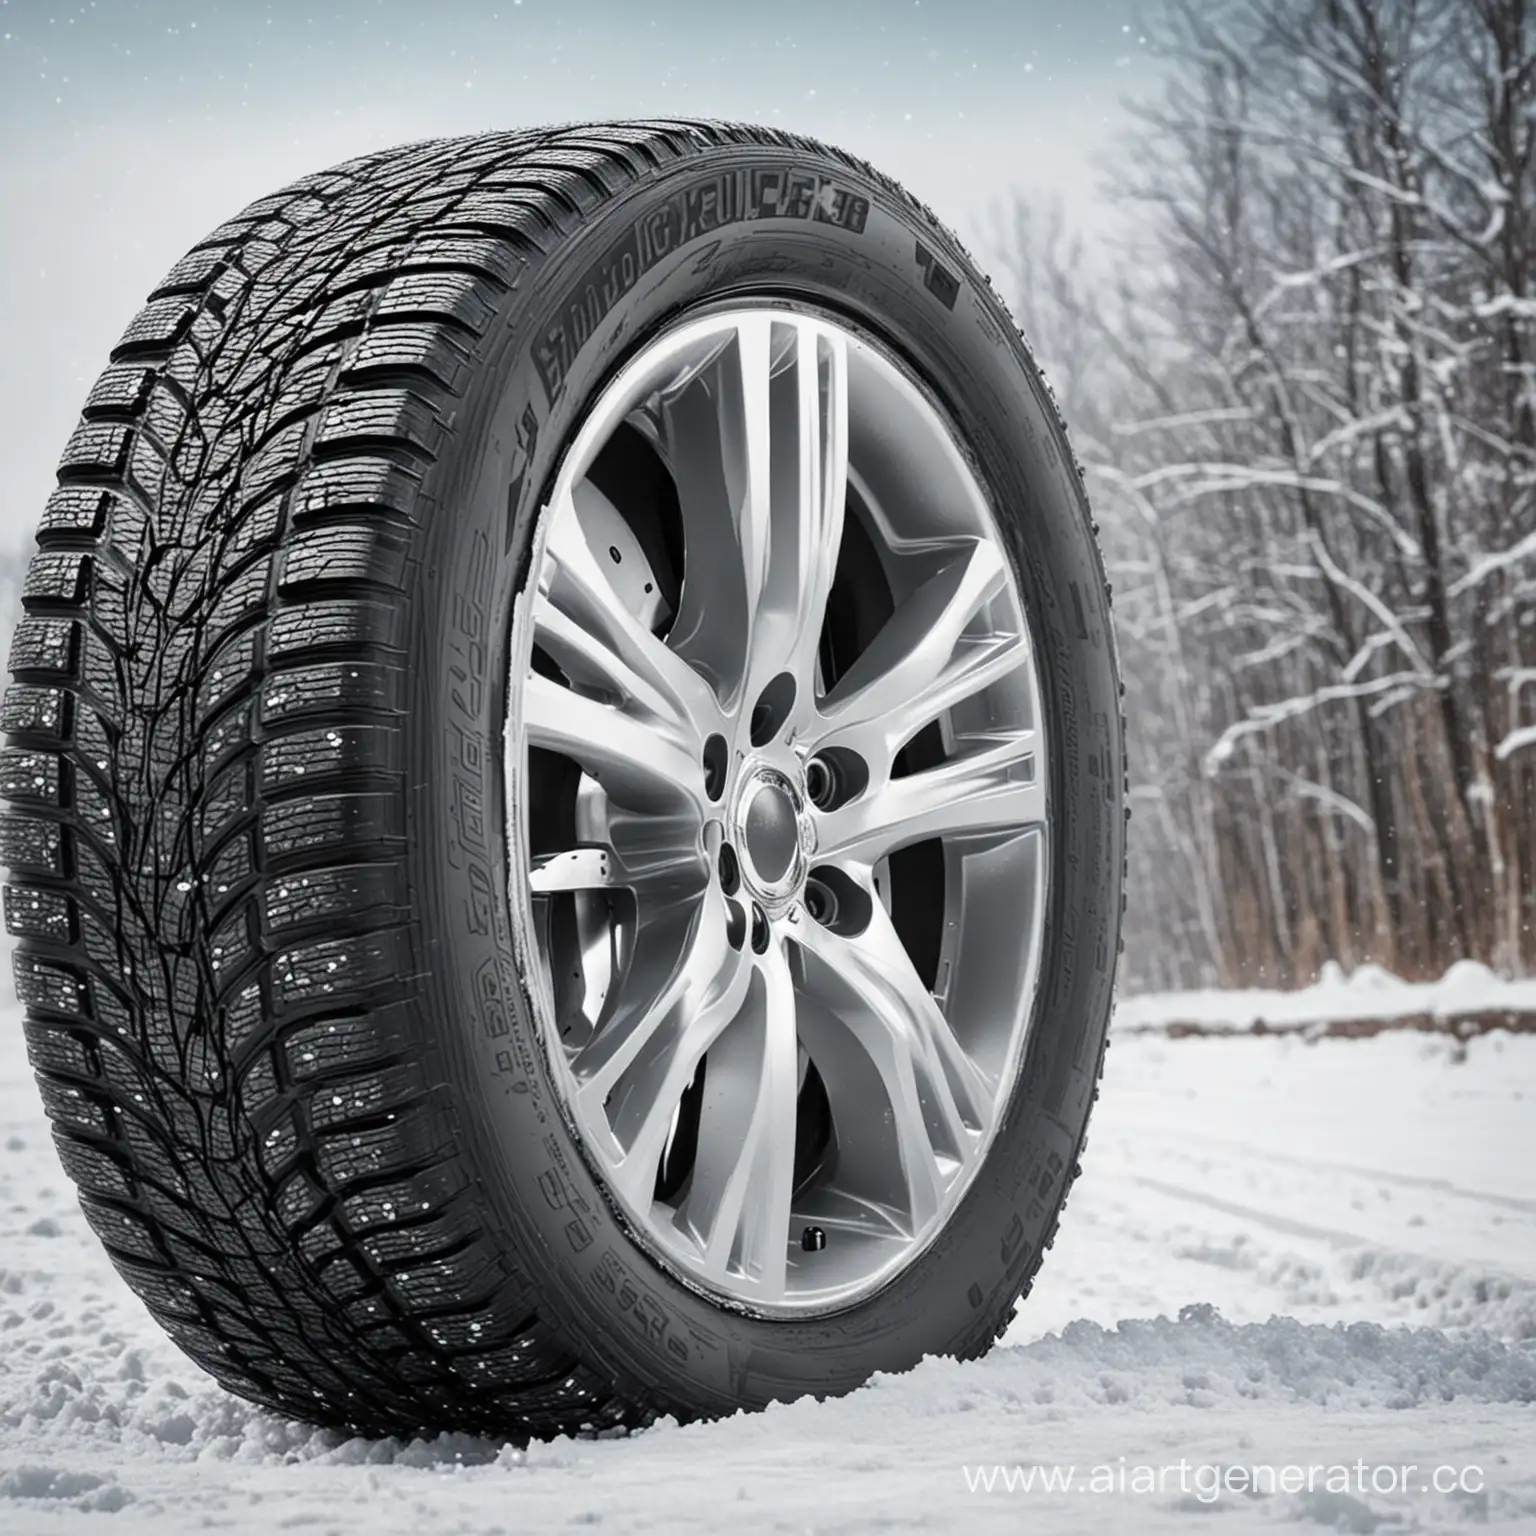 Professional-Tire-Mounting-Service-Transitioning-from-Winter-to-Summer-Tires